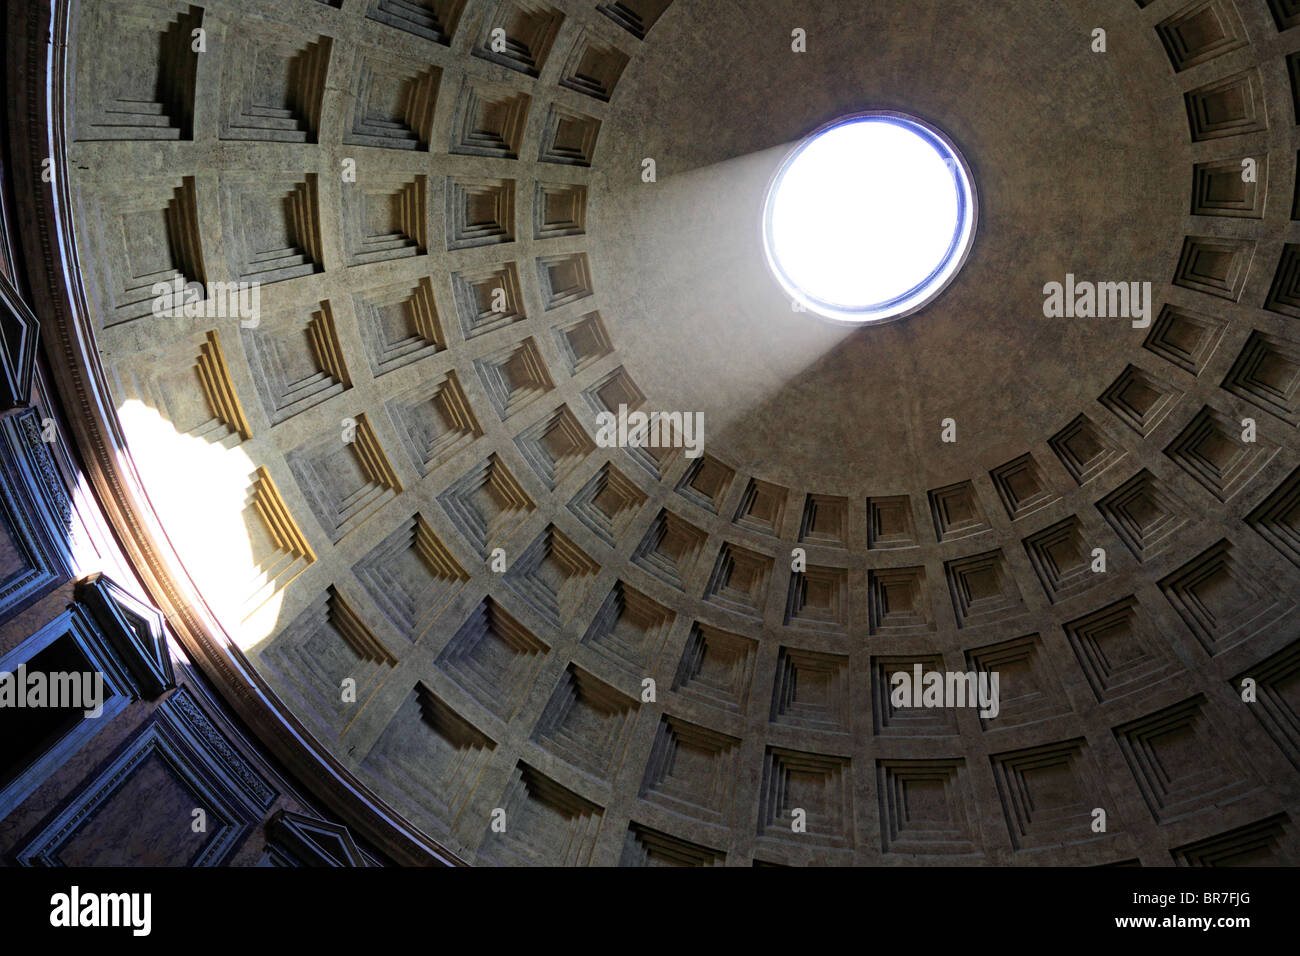 The sun illuminates the inside of the ceiling through the hole at the top of the Pantheon in Rome, Italy Stock Photo